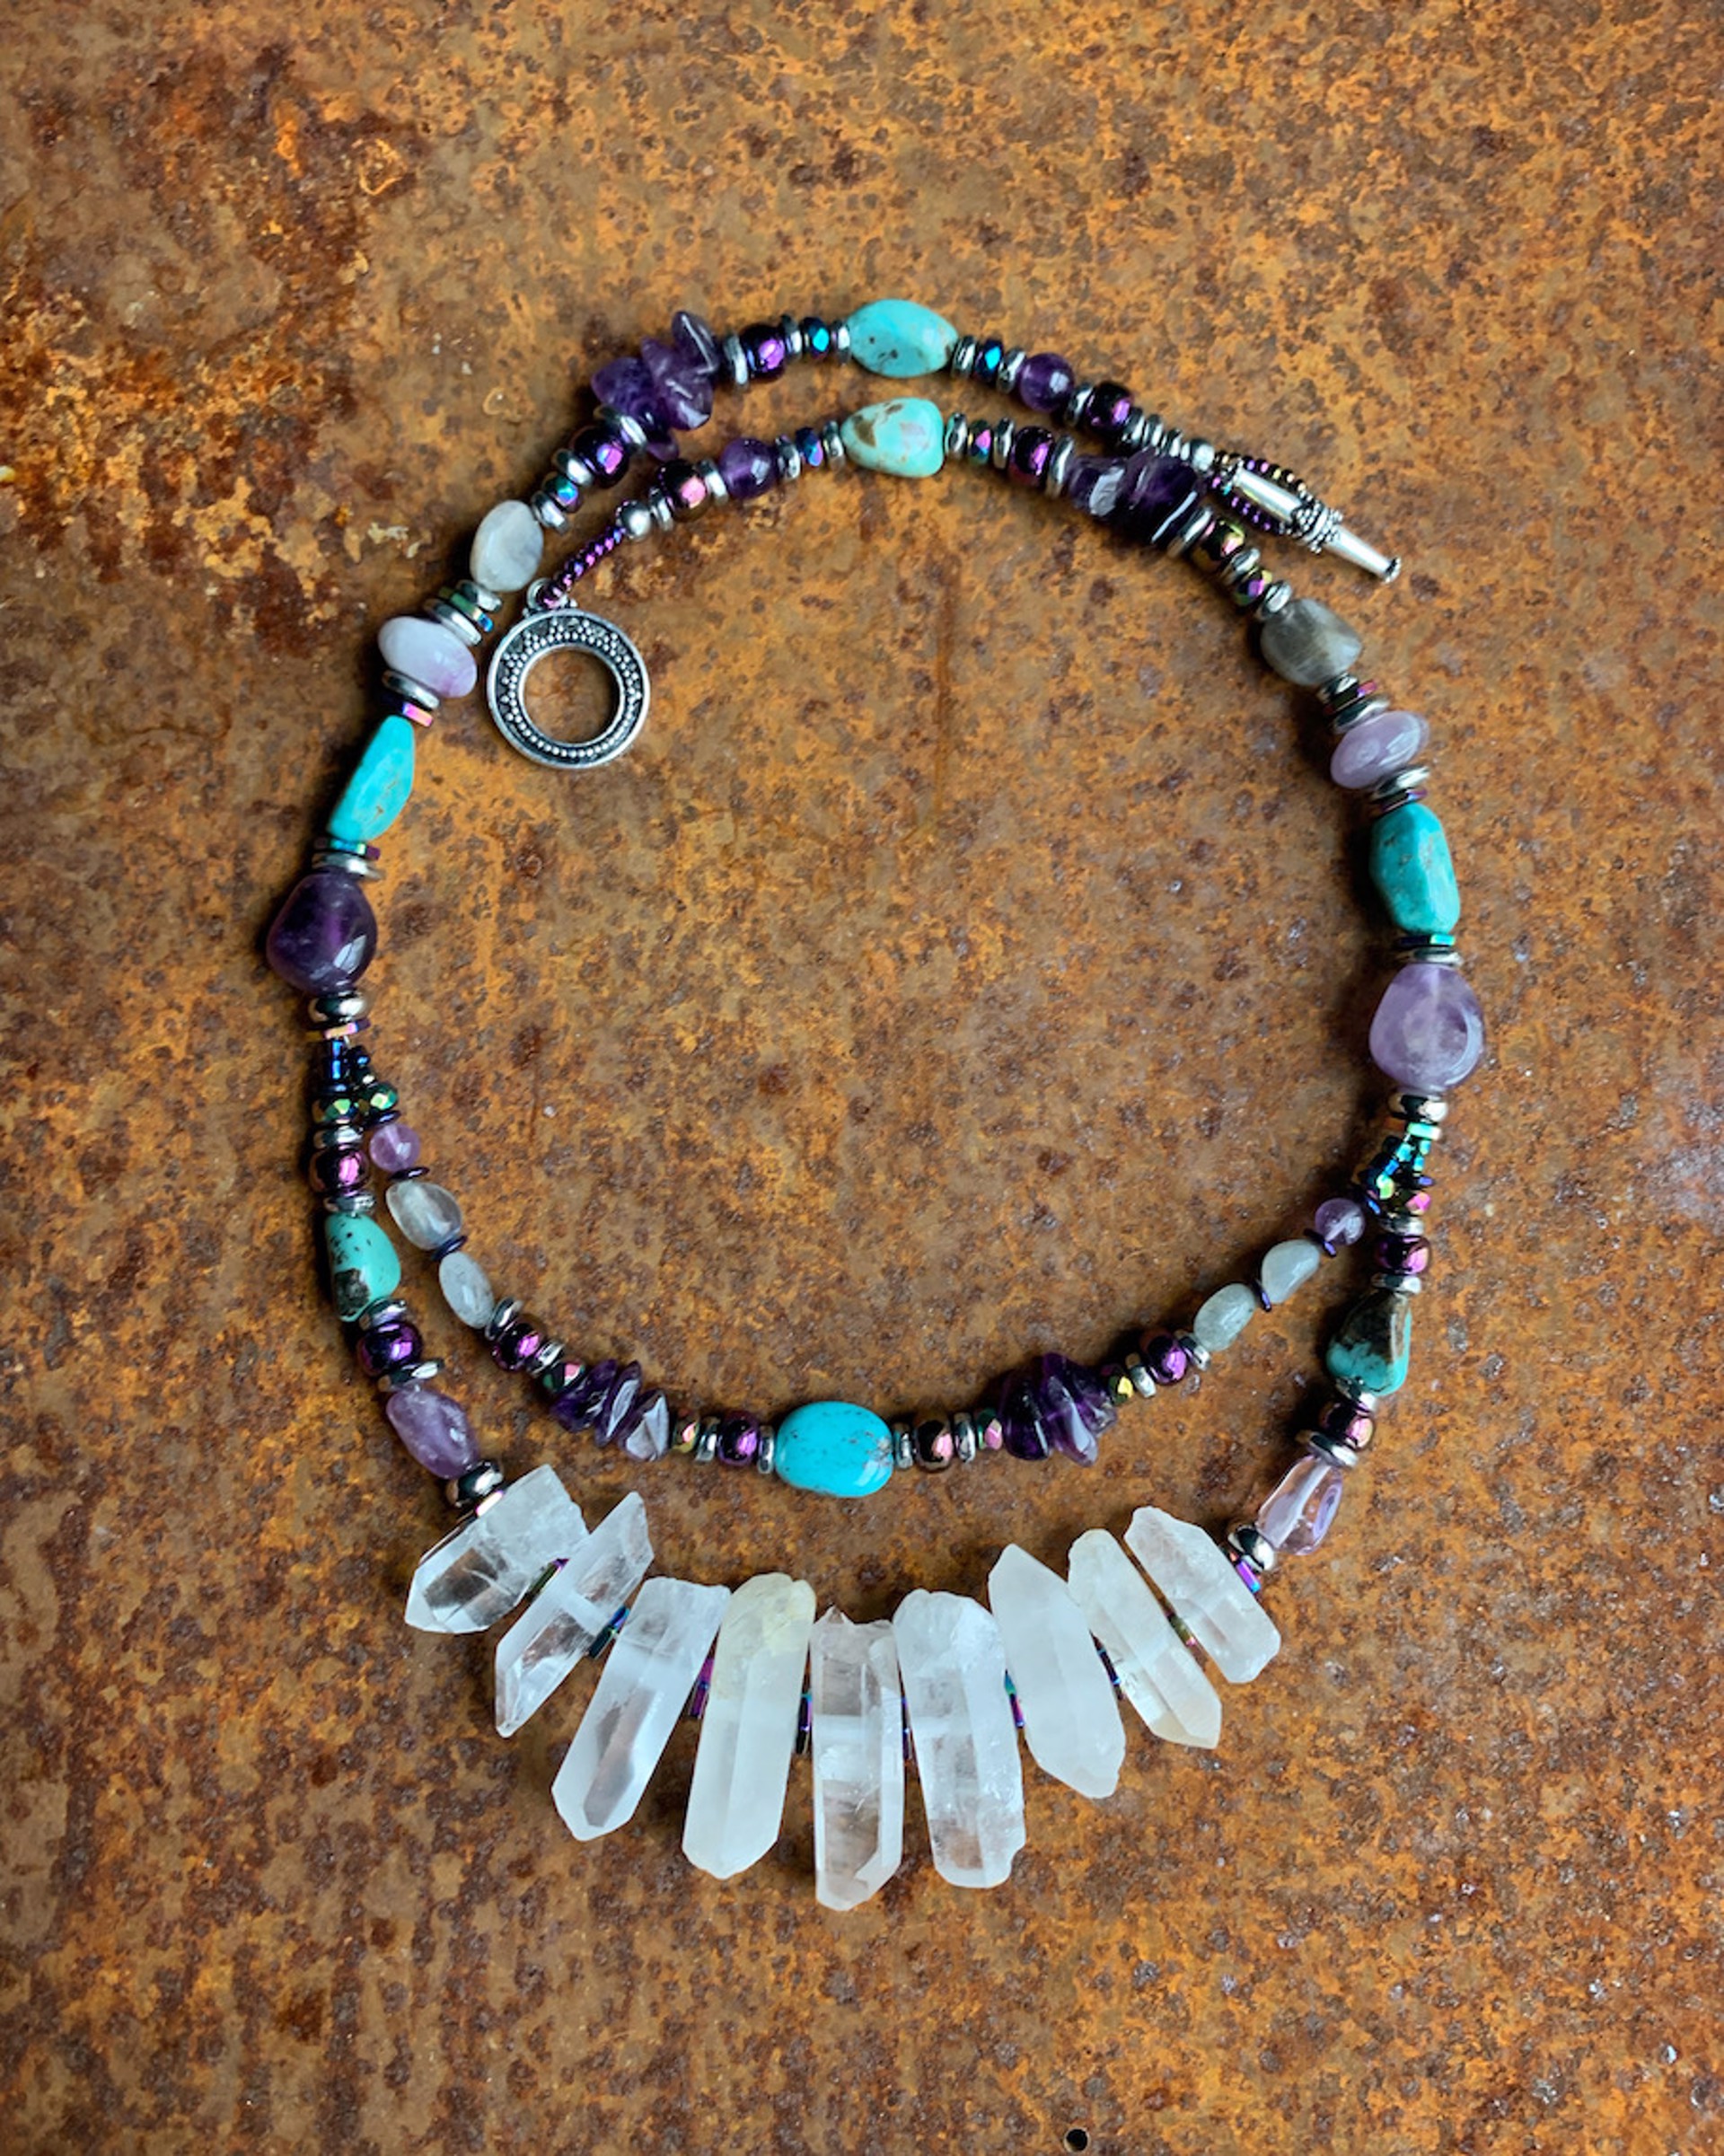 K704 Quartz Crystal Necklace with Amethyst and Turquoise